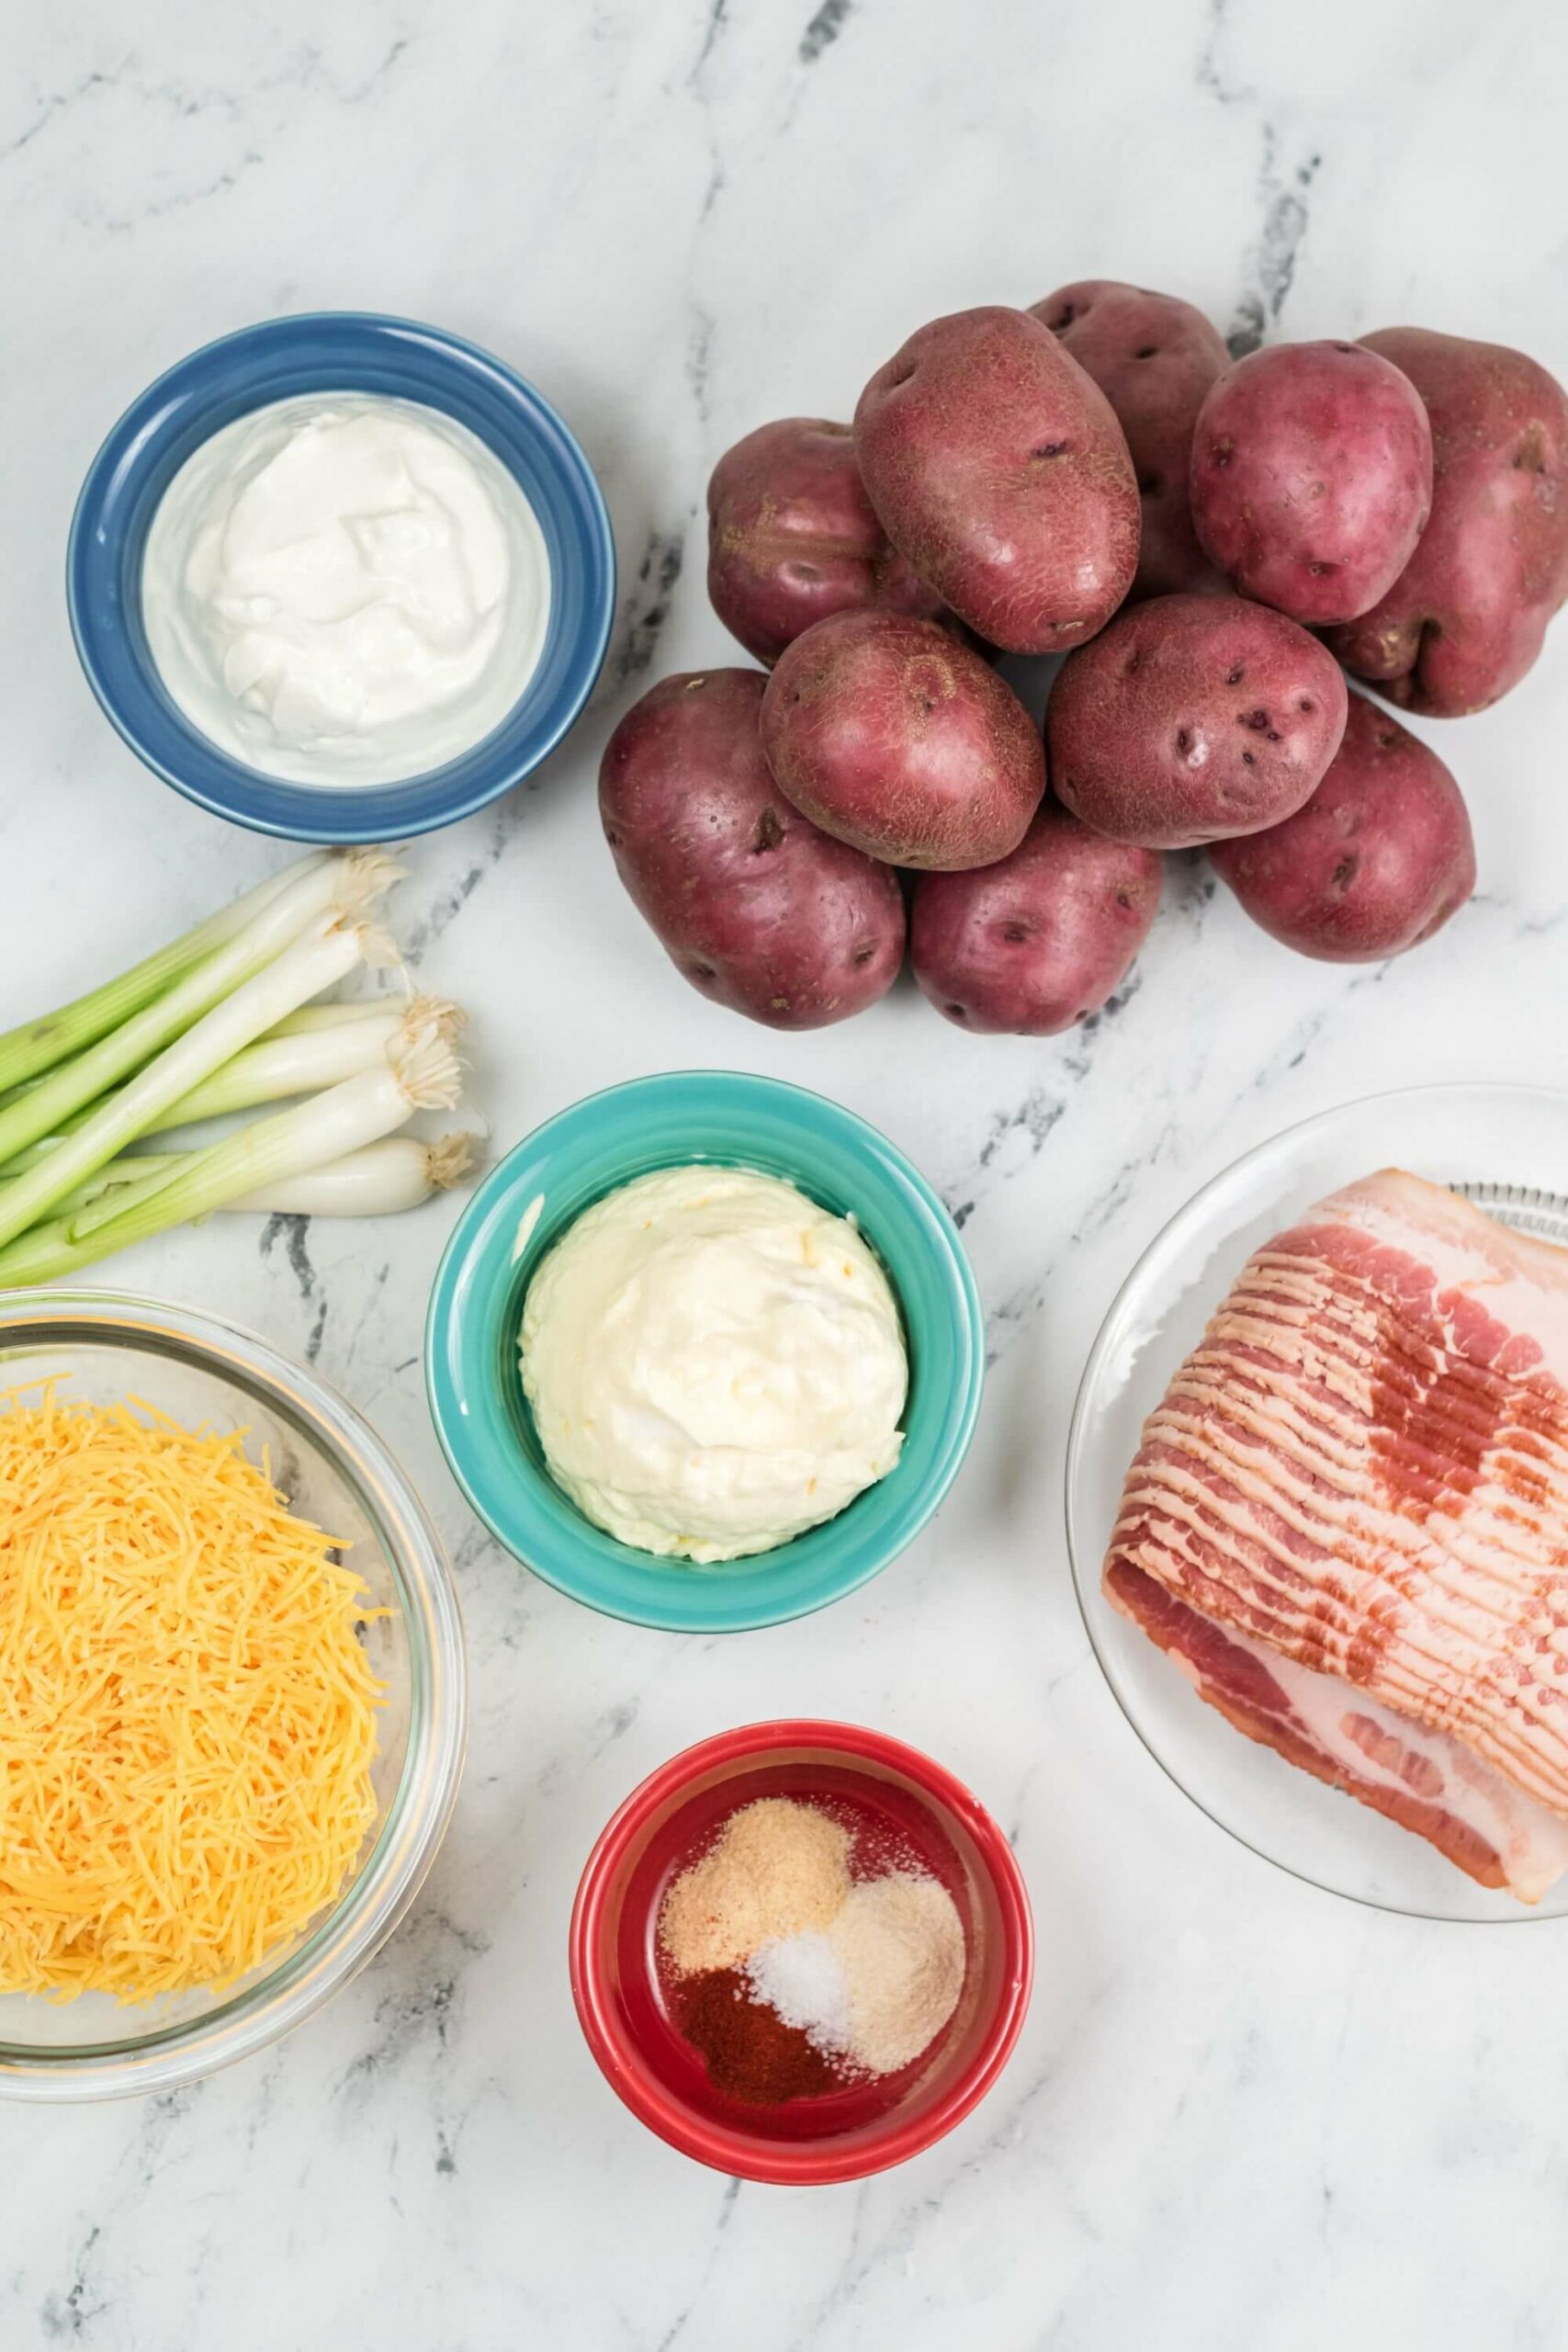 Ingredients for a Loaded Baked Potato Salad recipe on a marble countertop, including bowls of sour cream, mayonnaise, cheese, spices, green onions, potatoes, and bacon.